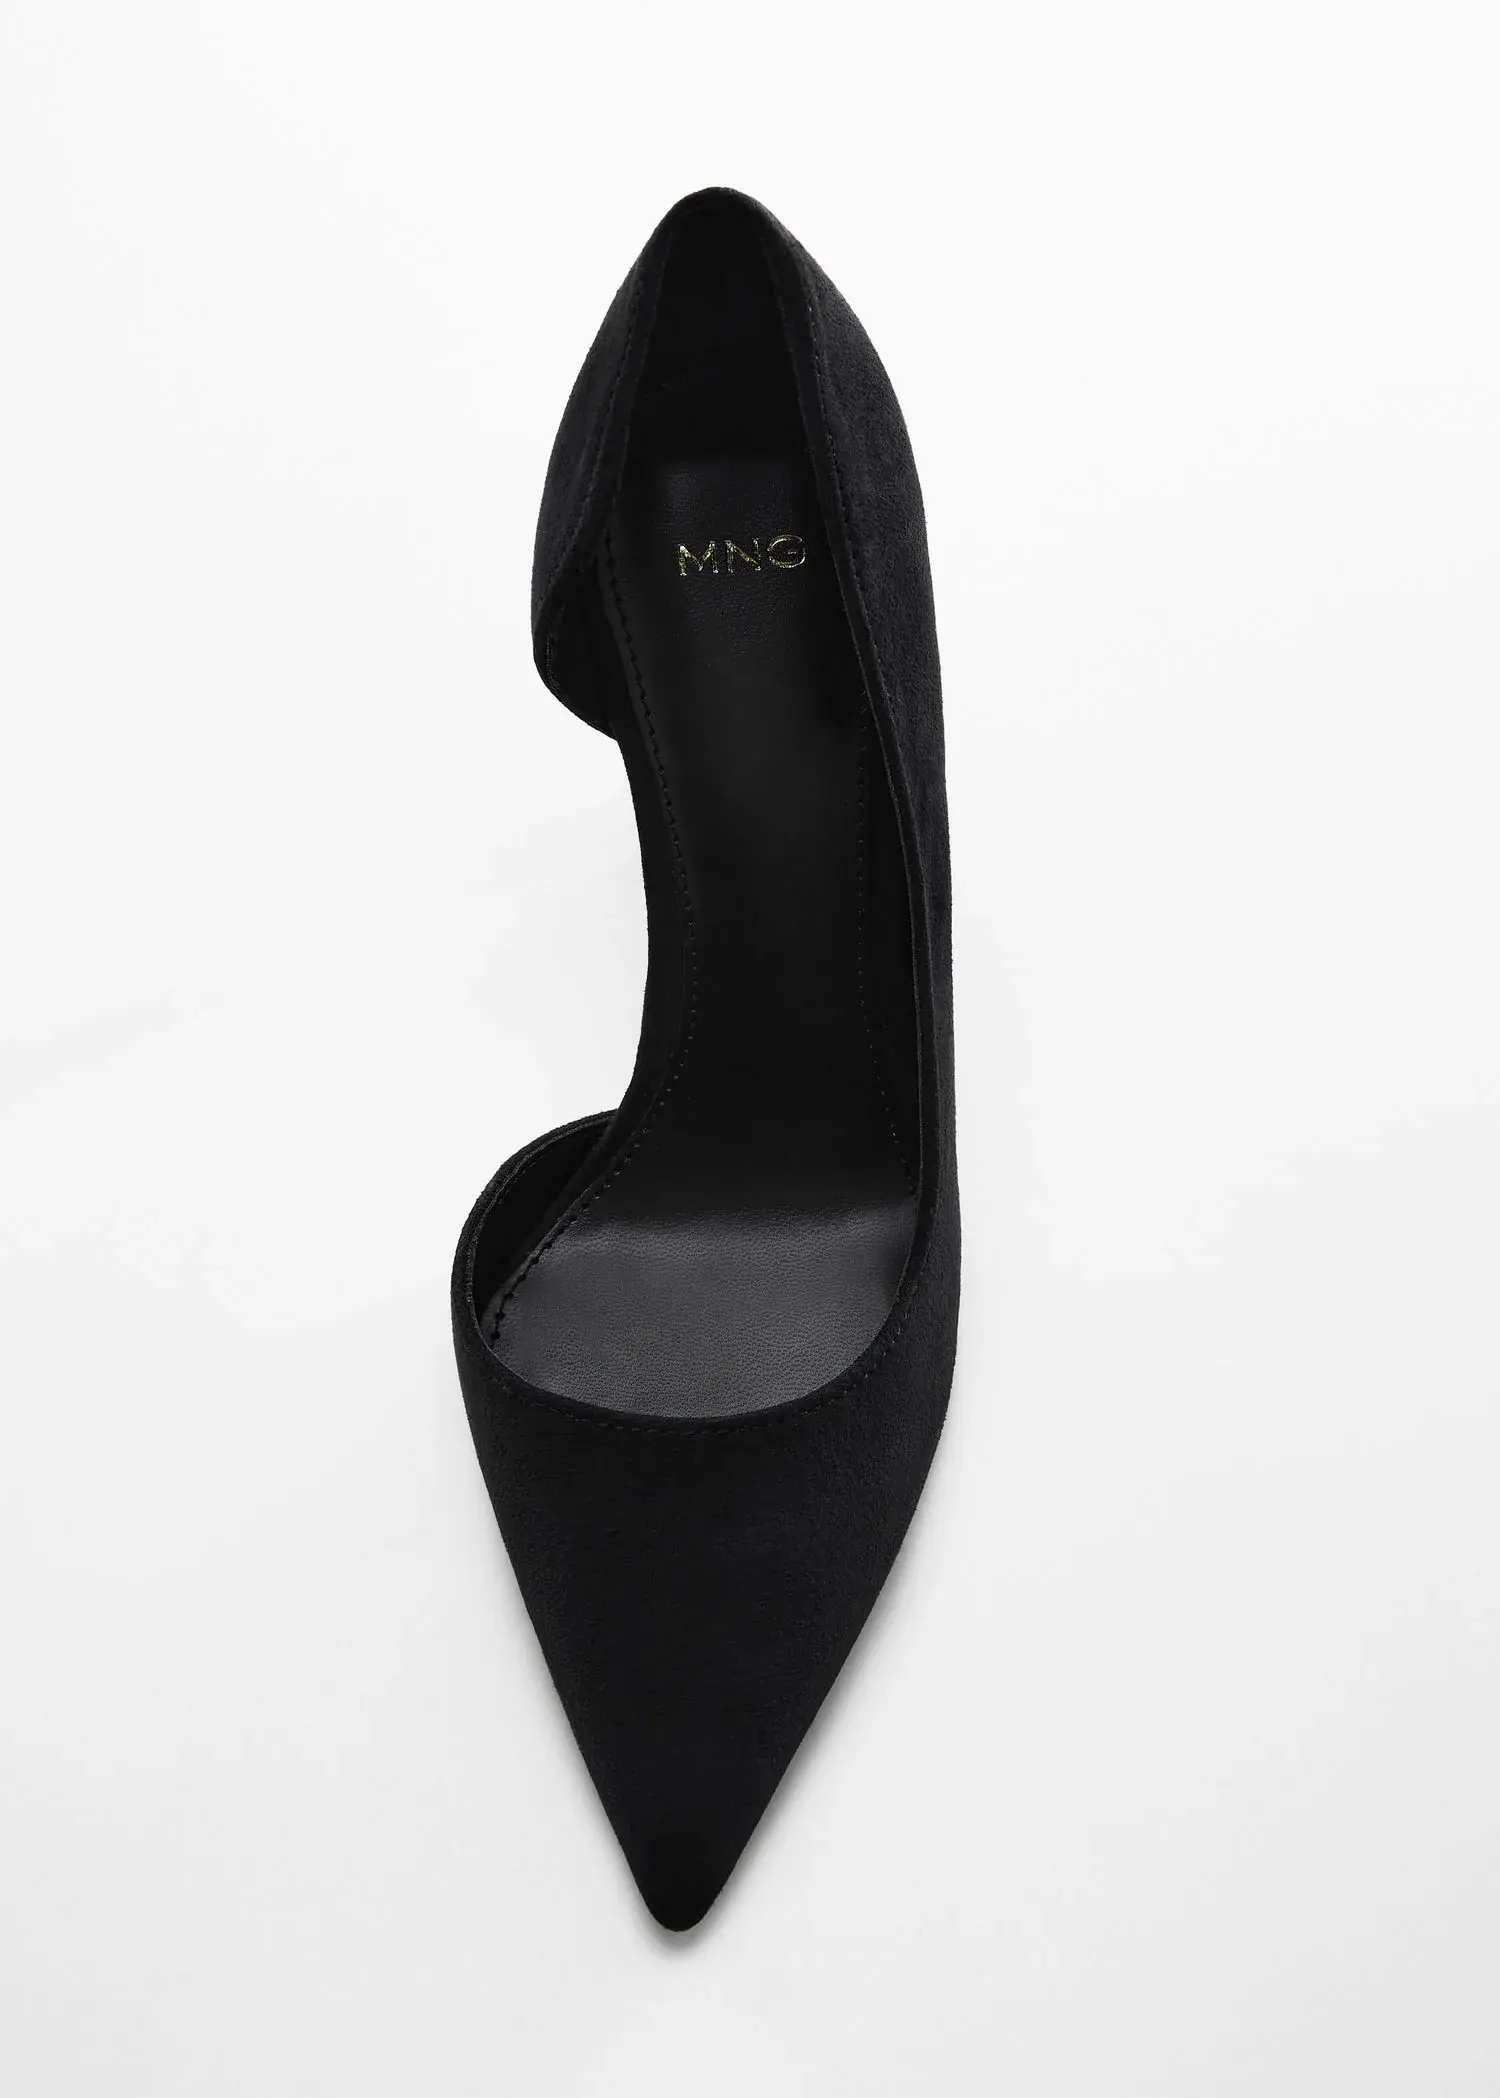 Mango Asymmetrical heeled shoes. a pair of black high heels on a white surface. 